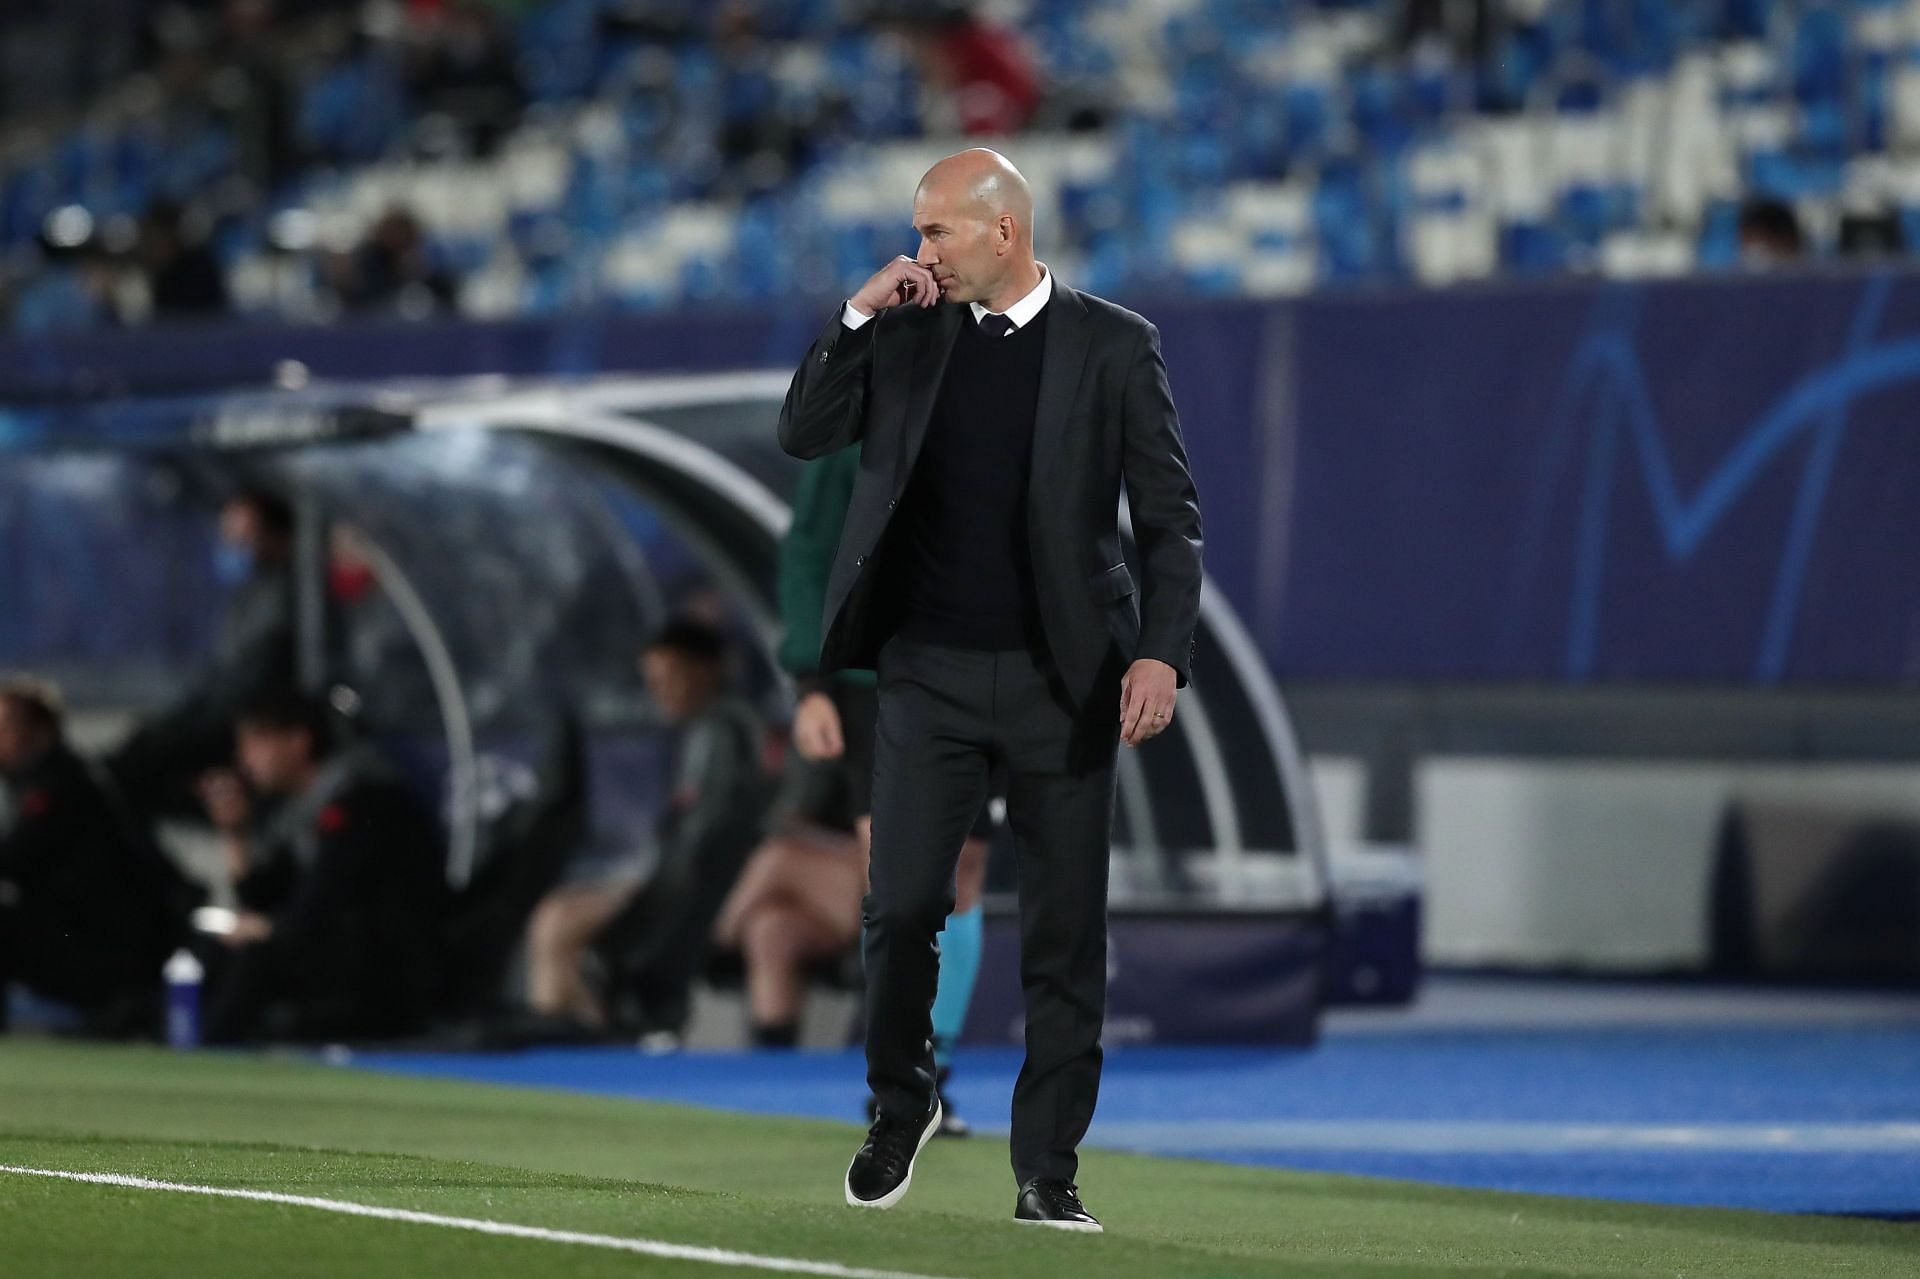 Zinedine Zidane has had success at Real Madrid both as player and manager.